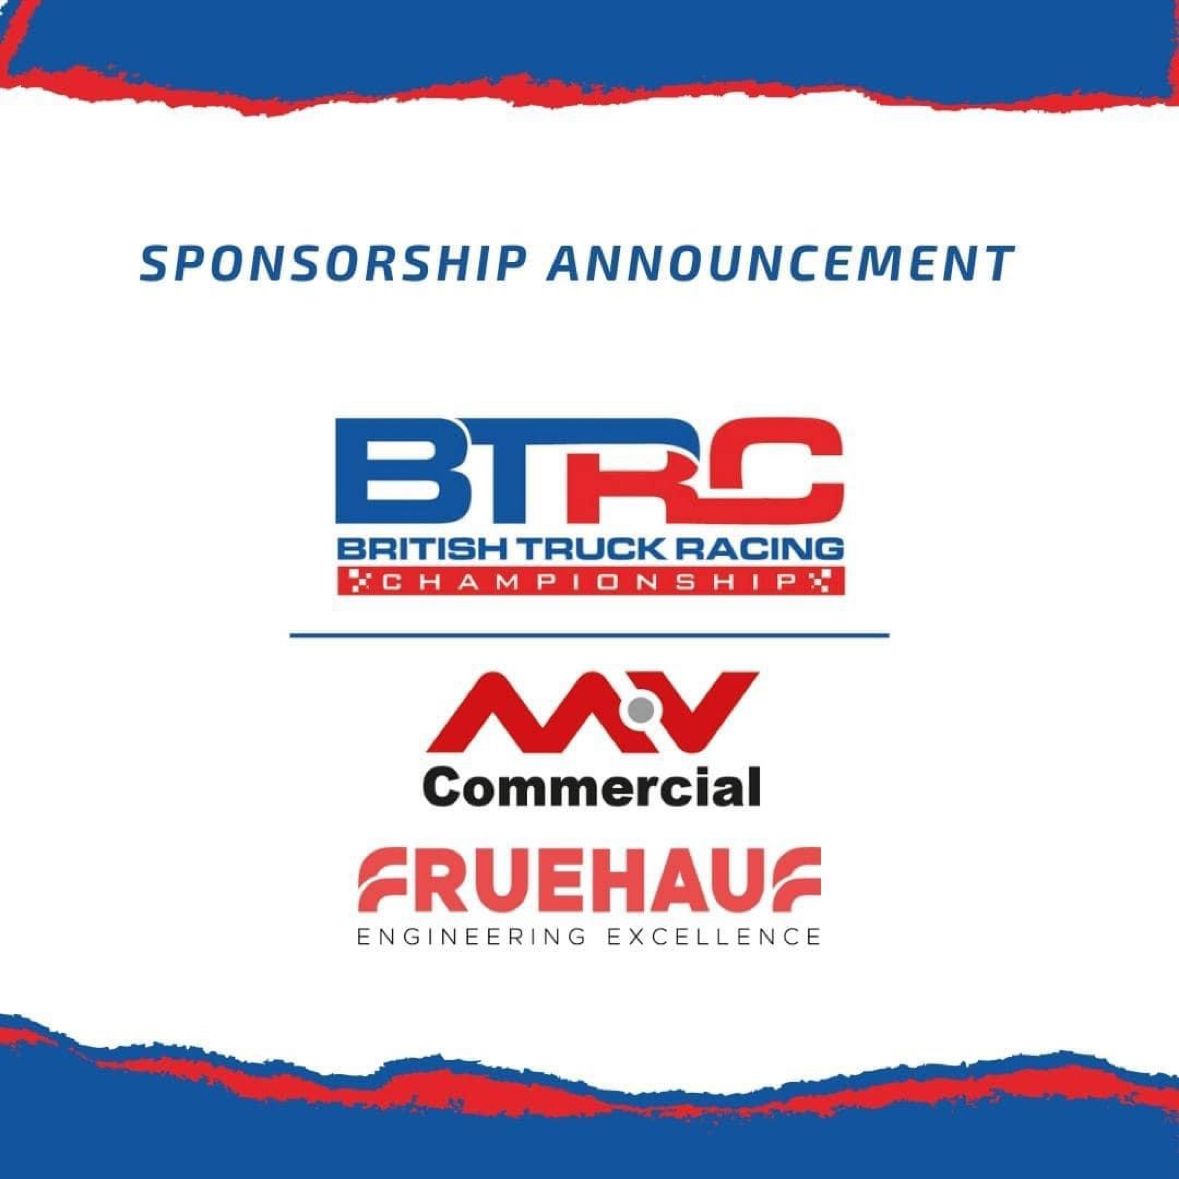 Image for MV Commercial Group renews long-standing partnership with the BTRC for 2023